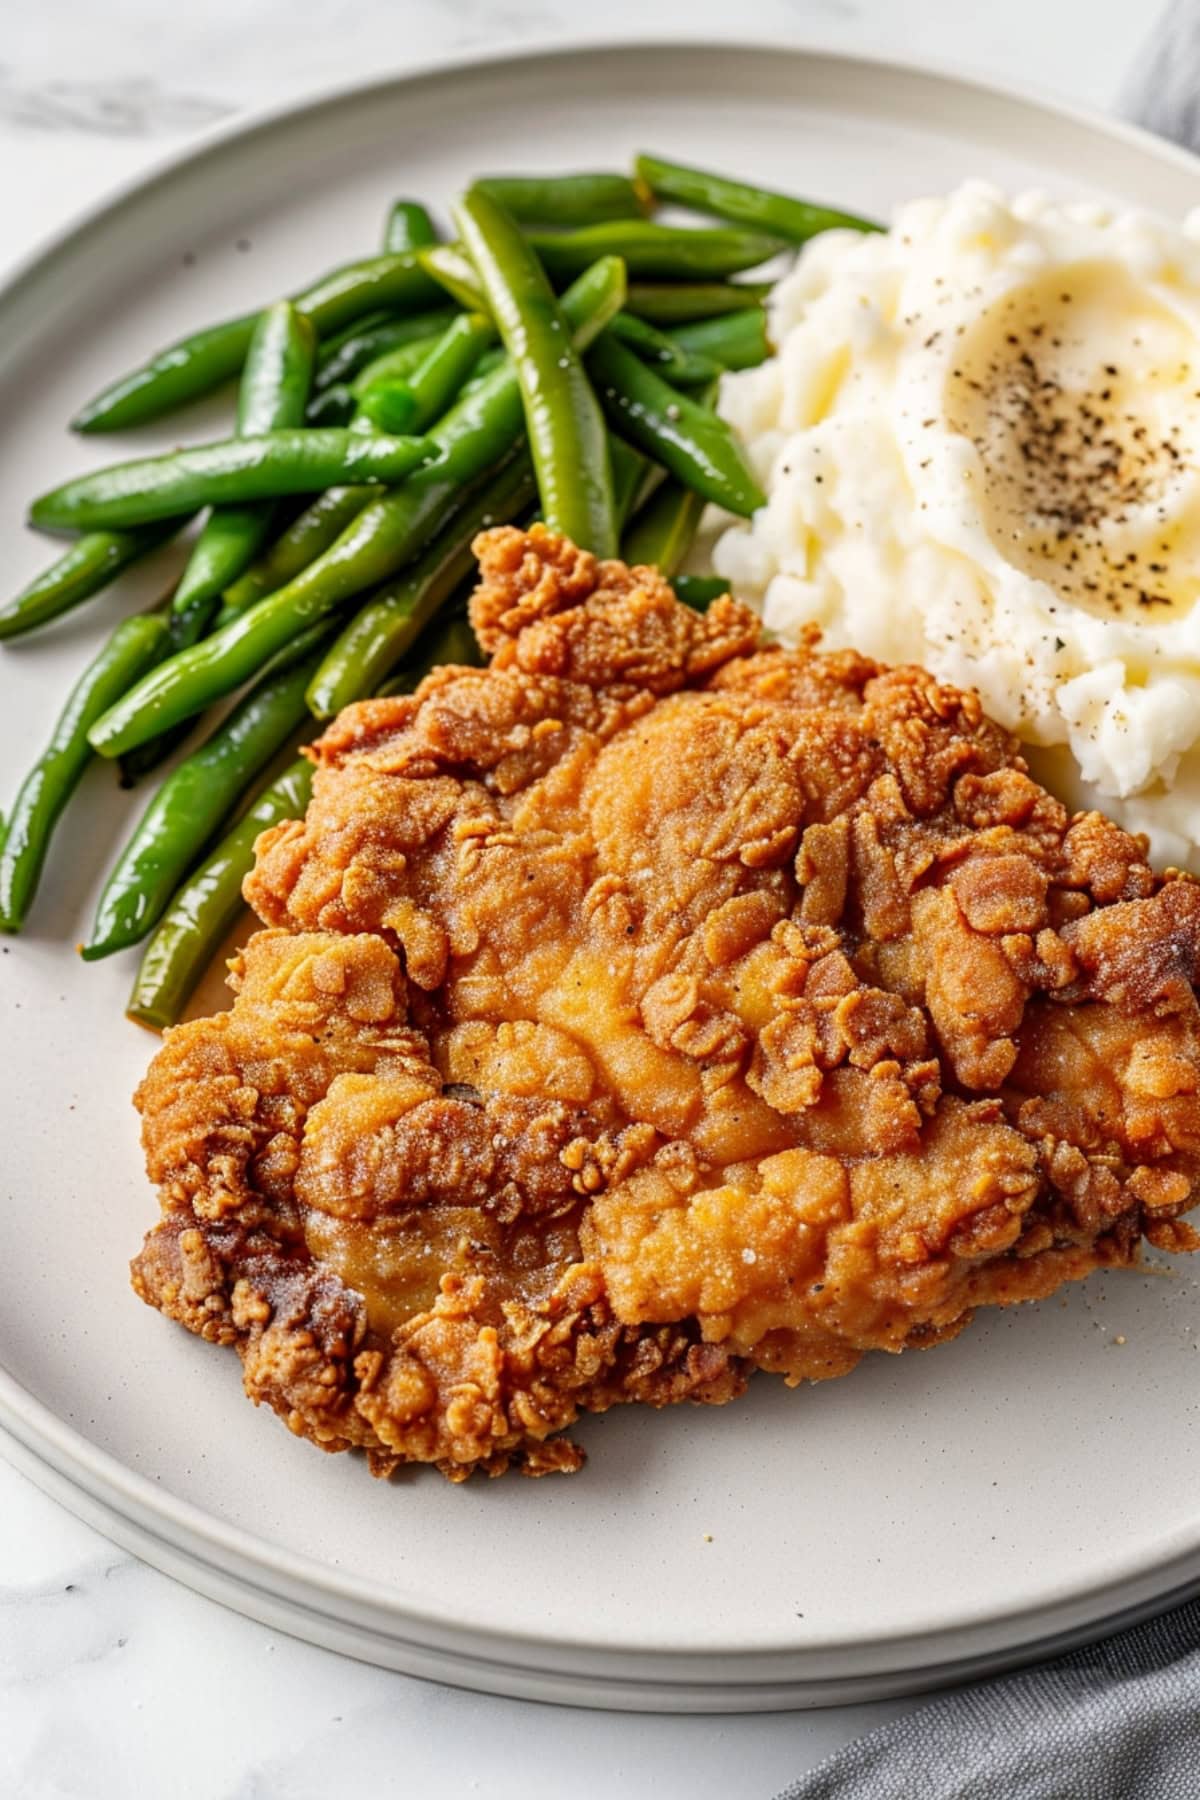 Delicious chicken fried steak with mashed potatoes and green beans